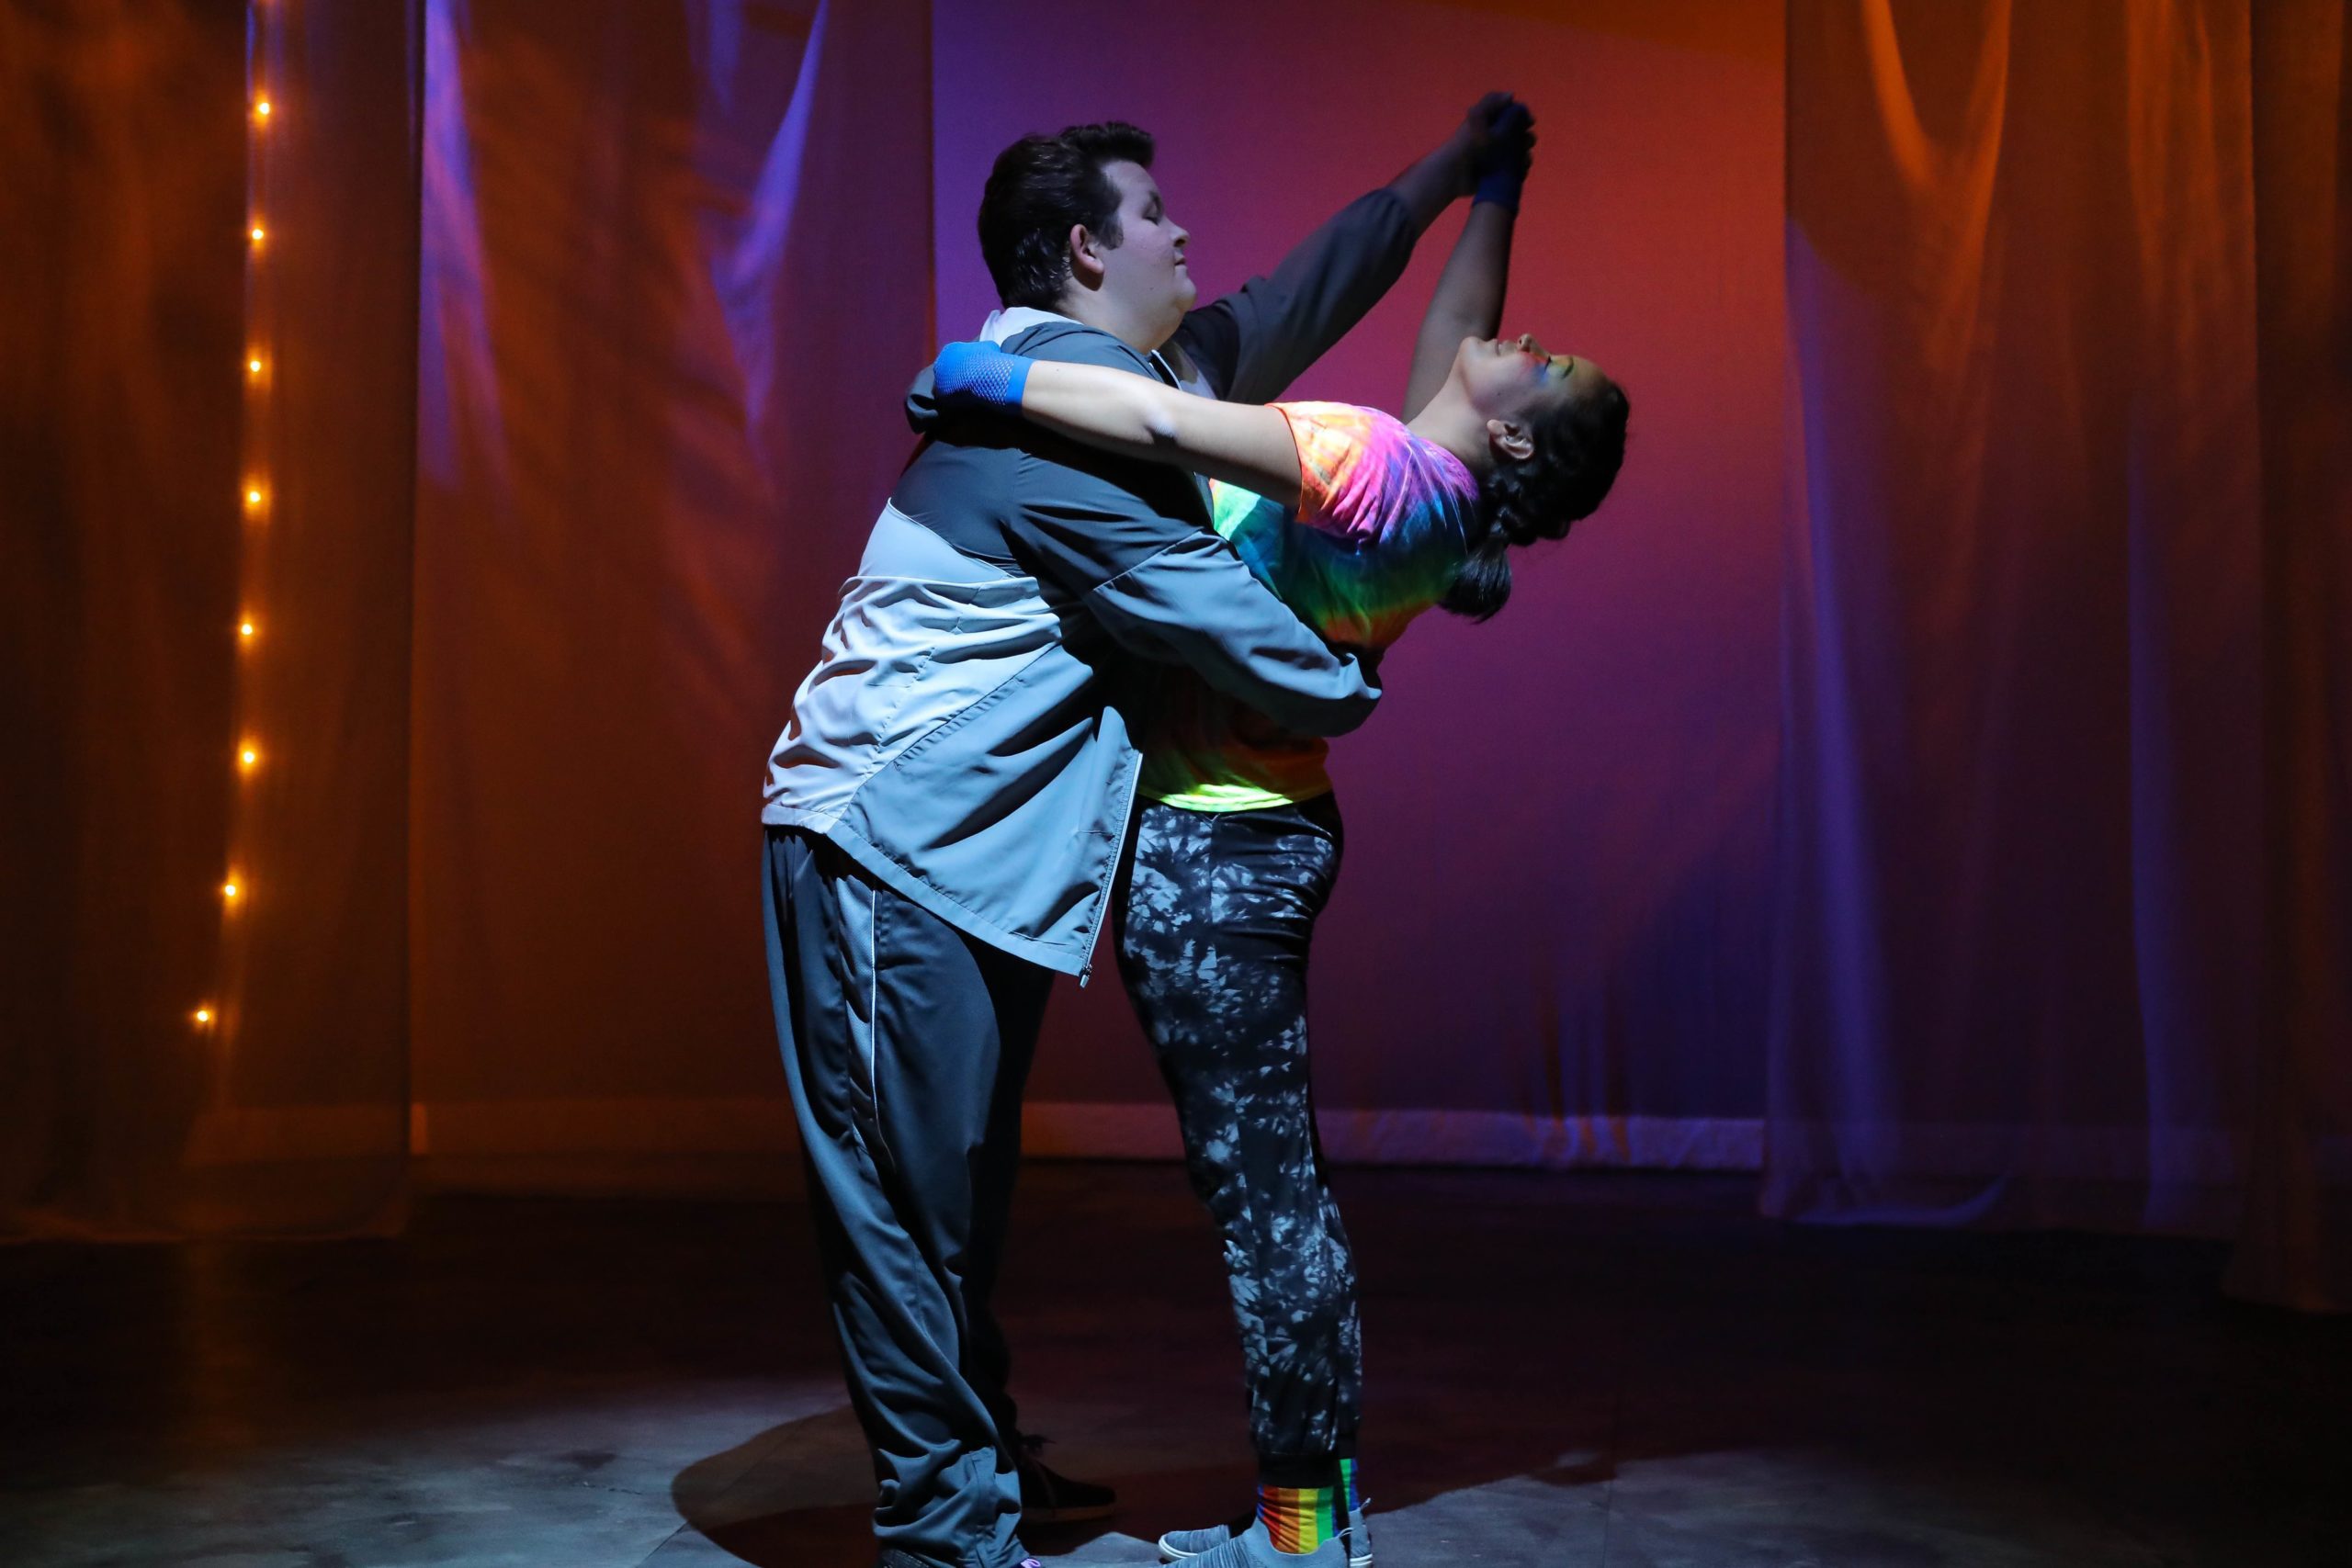 Couple dancing in front of red lighted backdrop